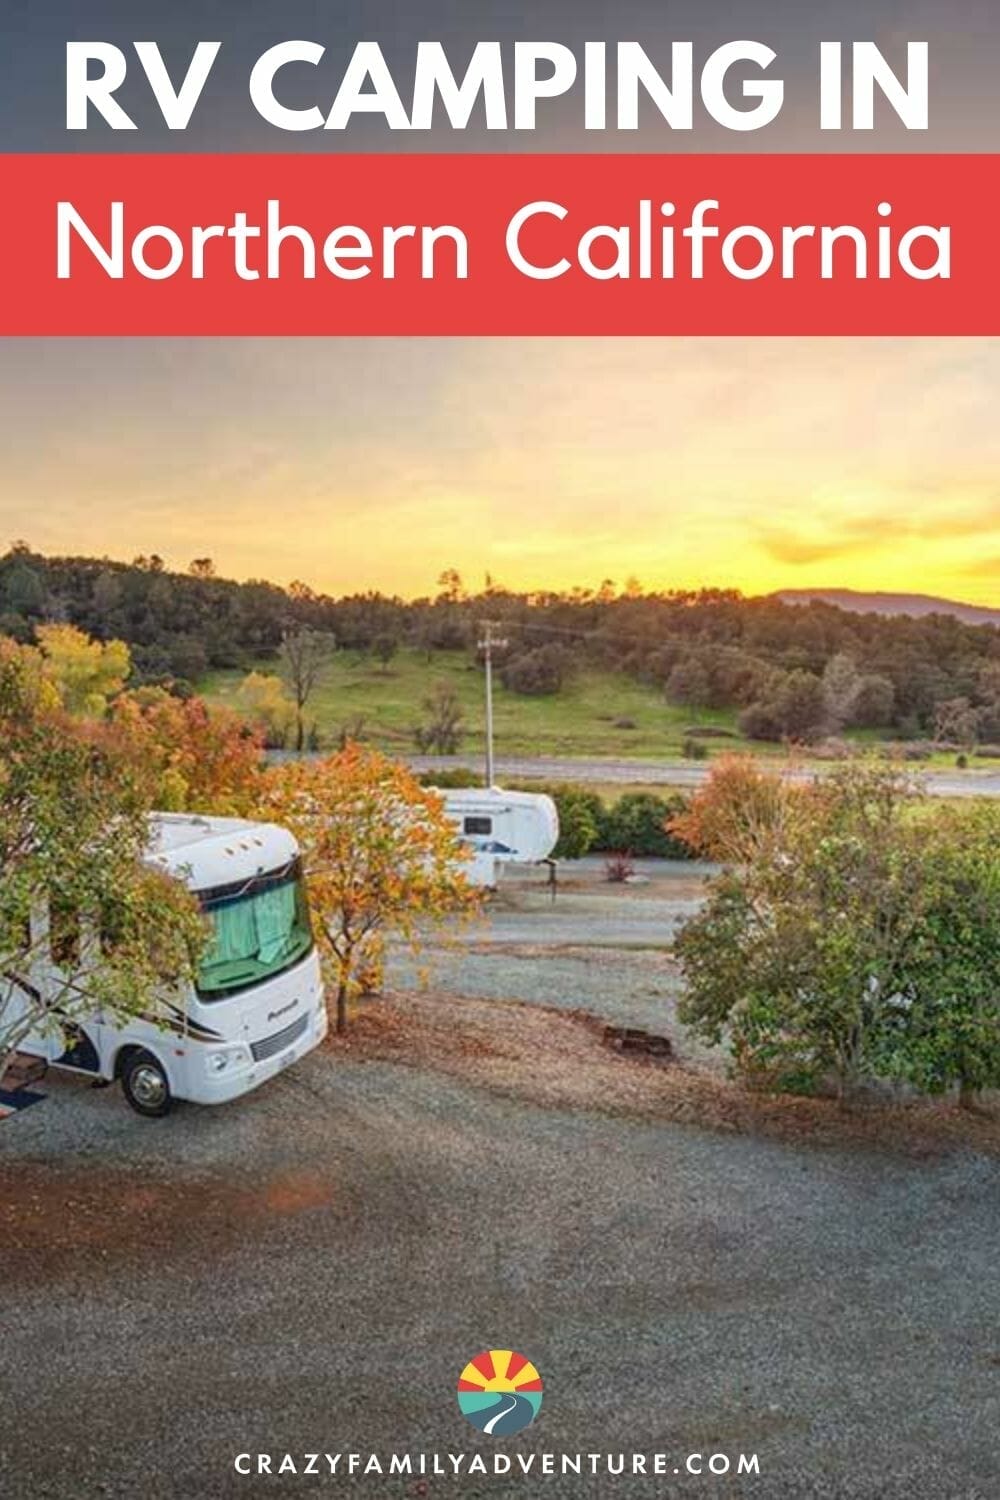 Campsites nestled between the giant trees or in a majestic mountain, these are our favorite spots for RV camping in Northern California!